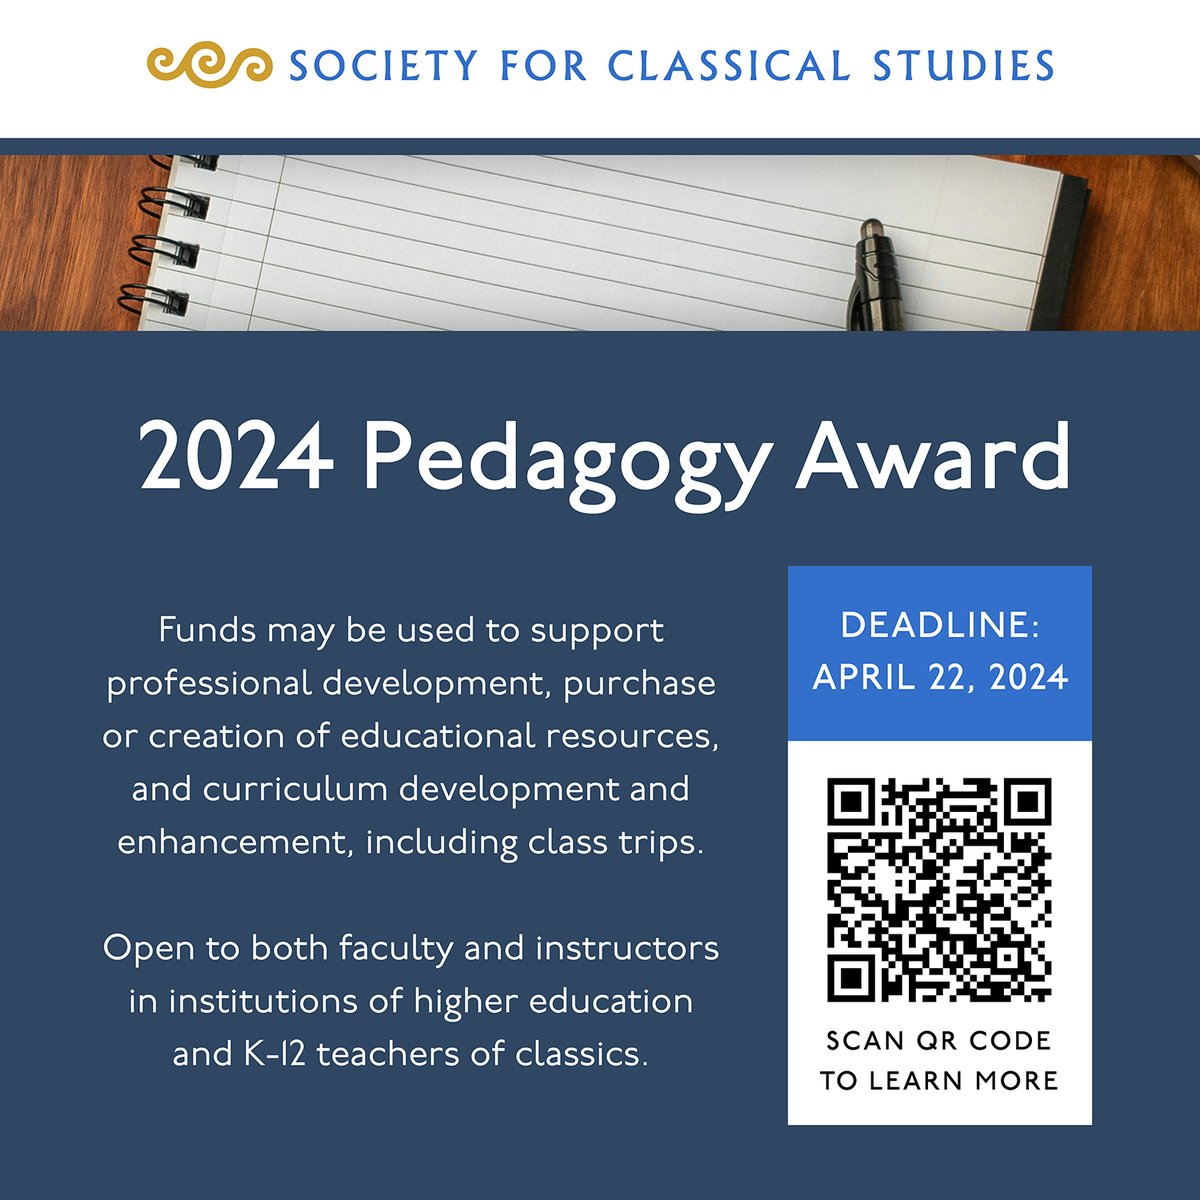 The application deadline for the 2024 Pedagogy Award is next Monday, April 22, 2024. The Award is open to both faculty and instructors in institutions of higher education and K-12 teachers of classics. Learn more: classicalstudies.org/awards-and-fel…